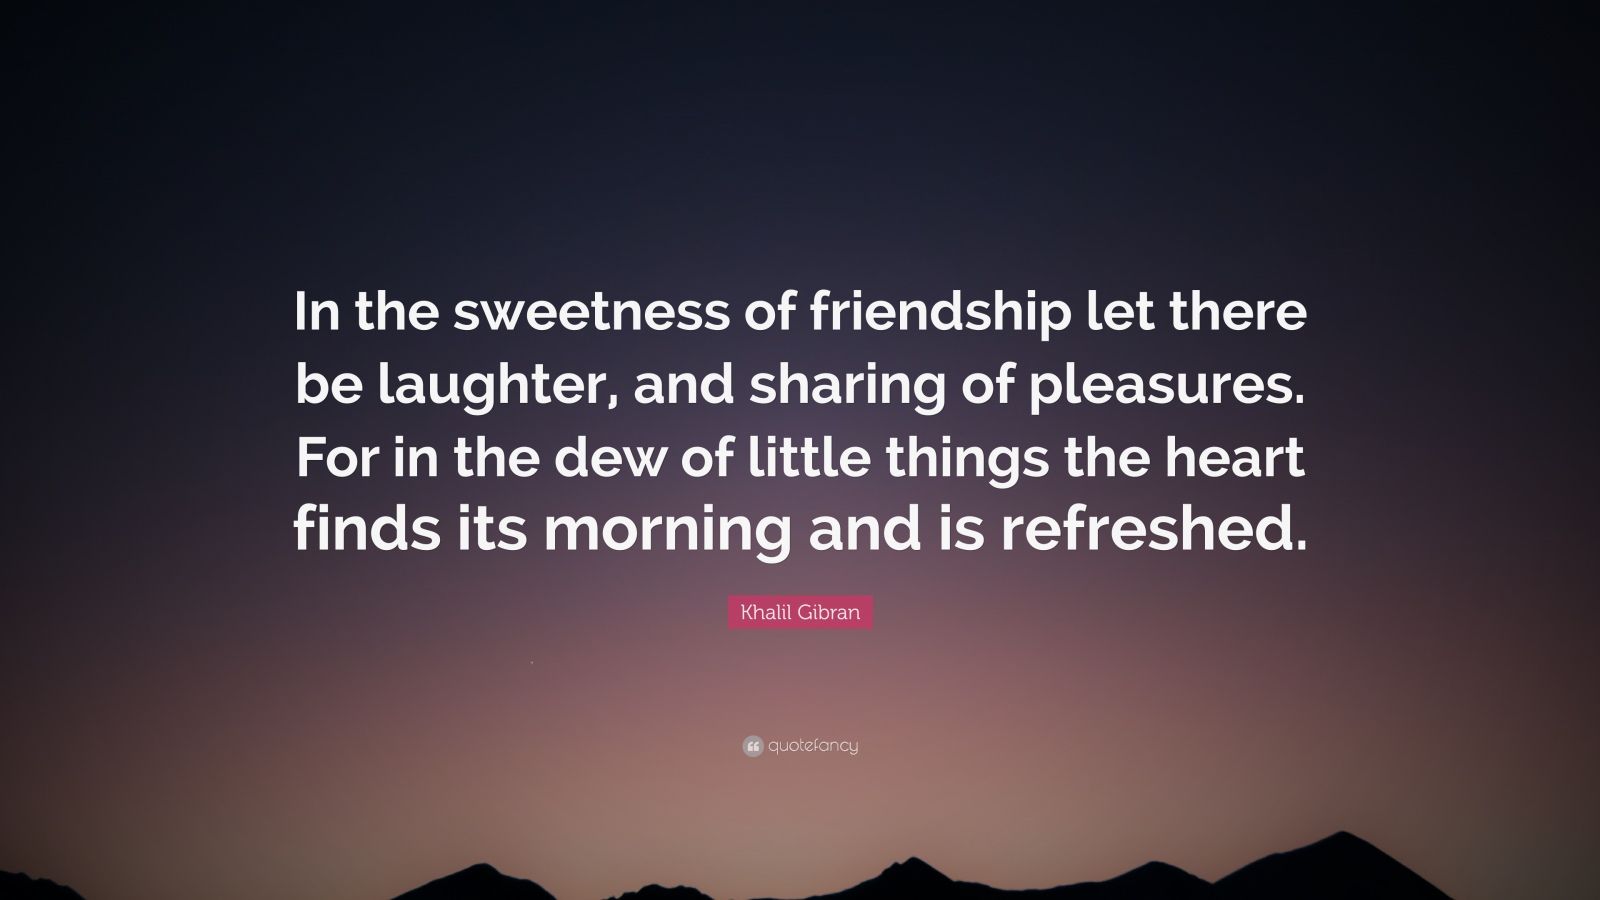 Khalil Gibran Quote: “In the sweetness of friendship let there be